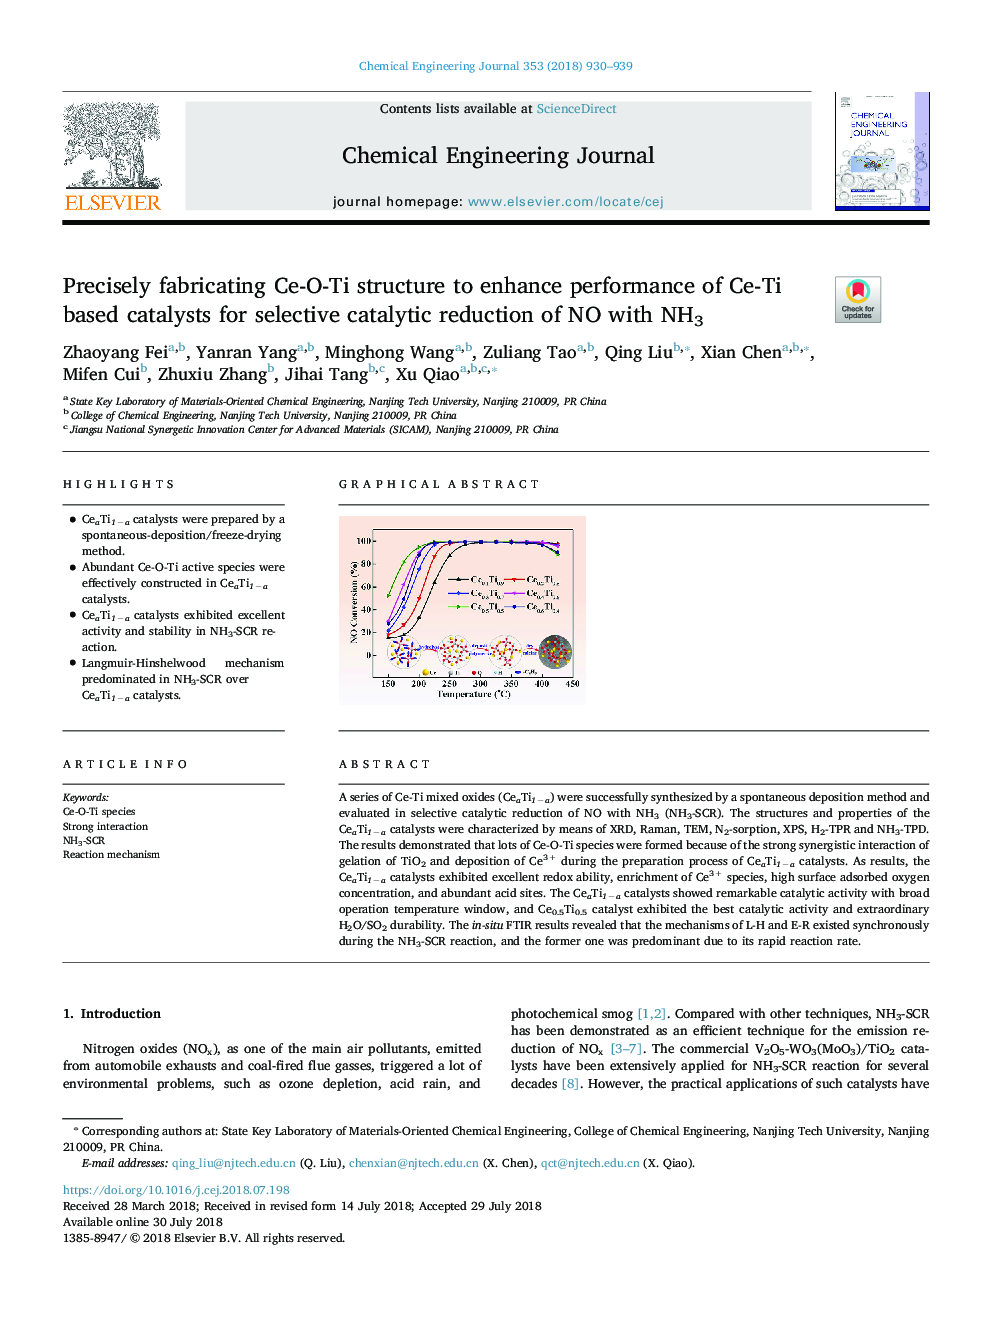 Precisely fabricating Ce-O-Ti structure to enhance performance of Ce-Ti based catalysts for selective catalytic reduction of NO with NH3